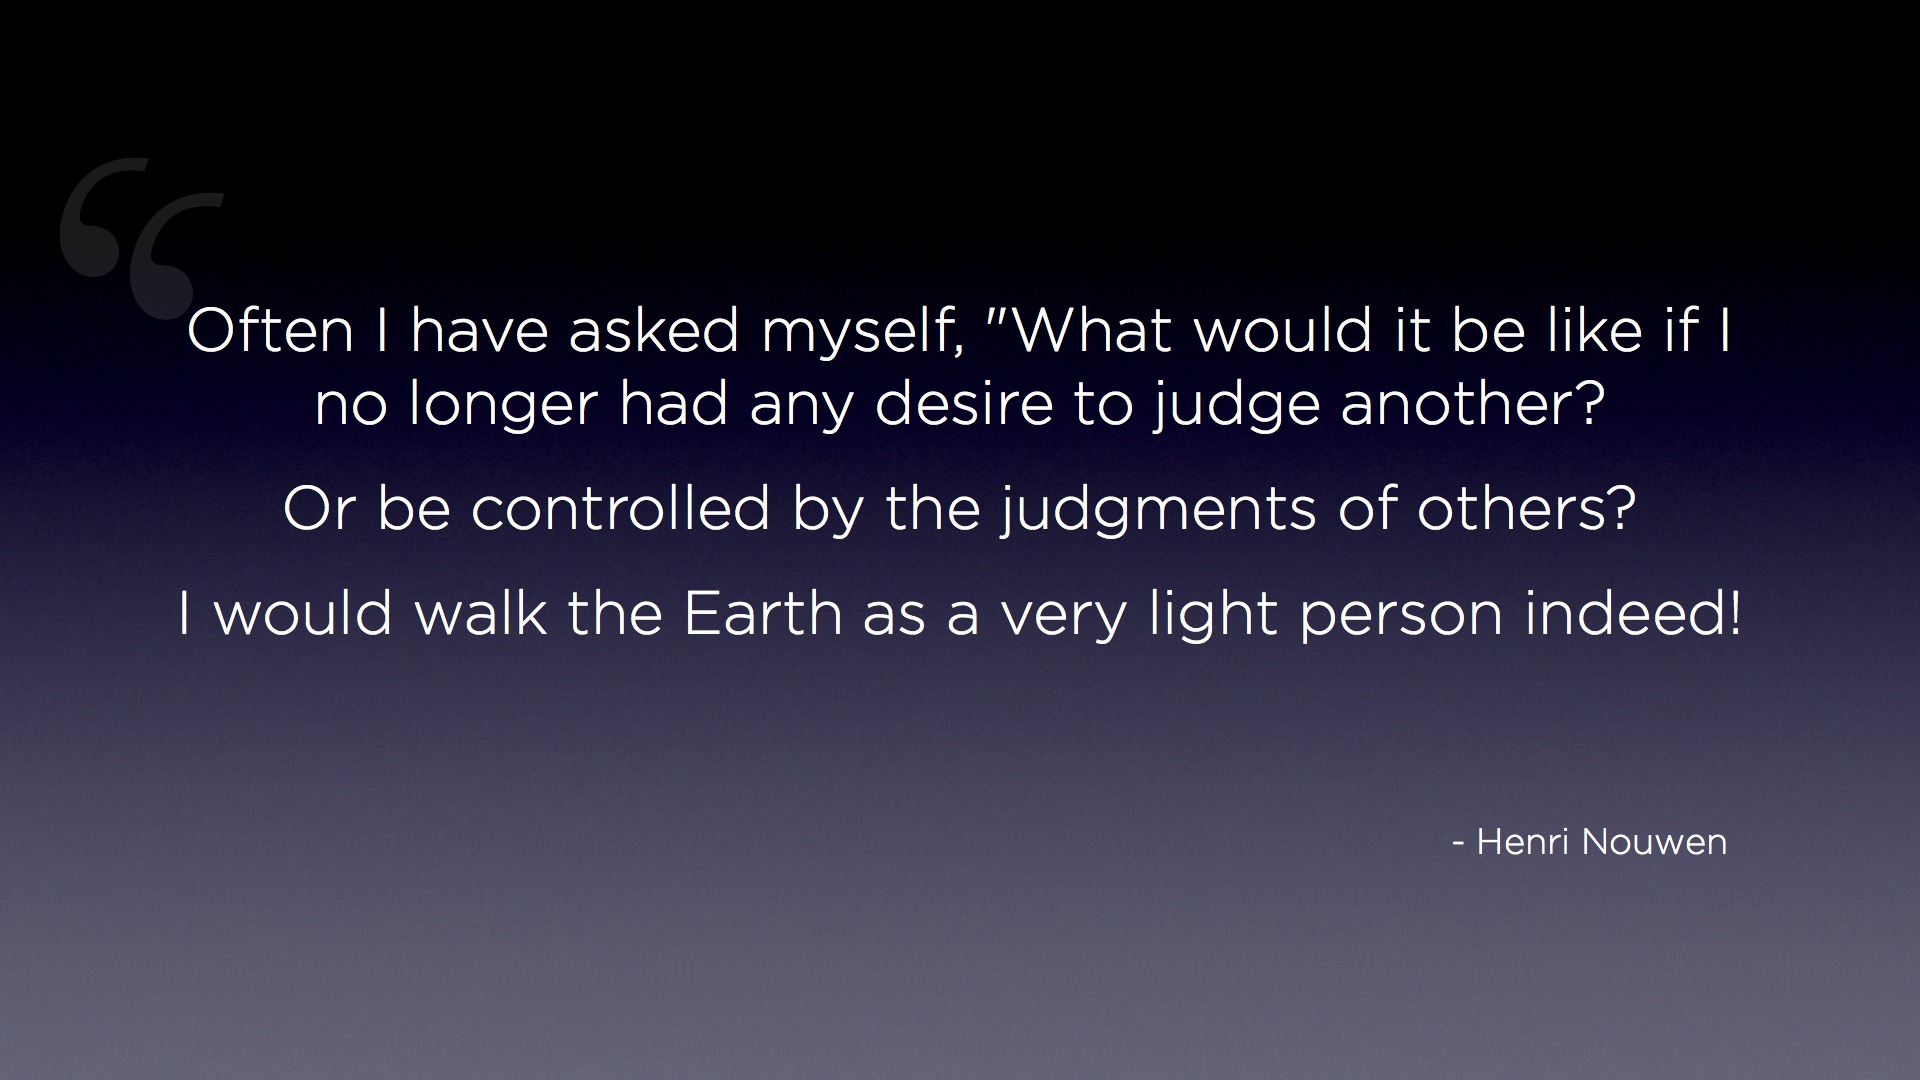 "Judging other is a heavy "Often I have asked myself, "What would it be like if I no longer had any desire to judge another?  Or be controlled by the judgments of others?  I would walk on the Earth as a very light person indeed!" - Henri Nouwen